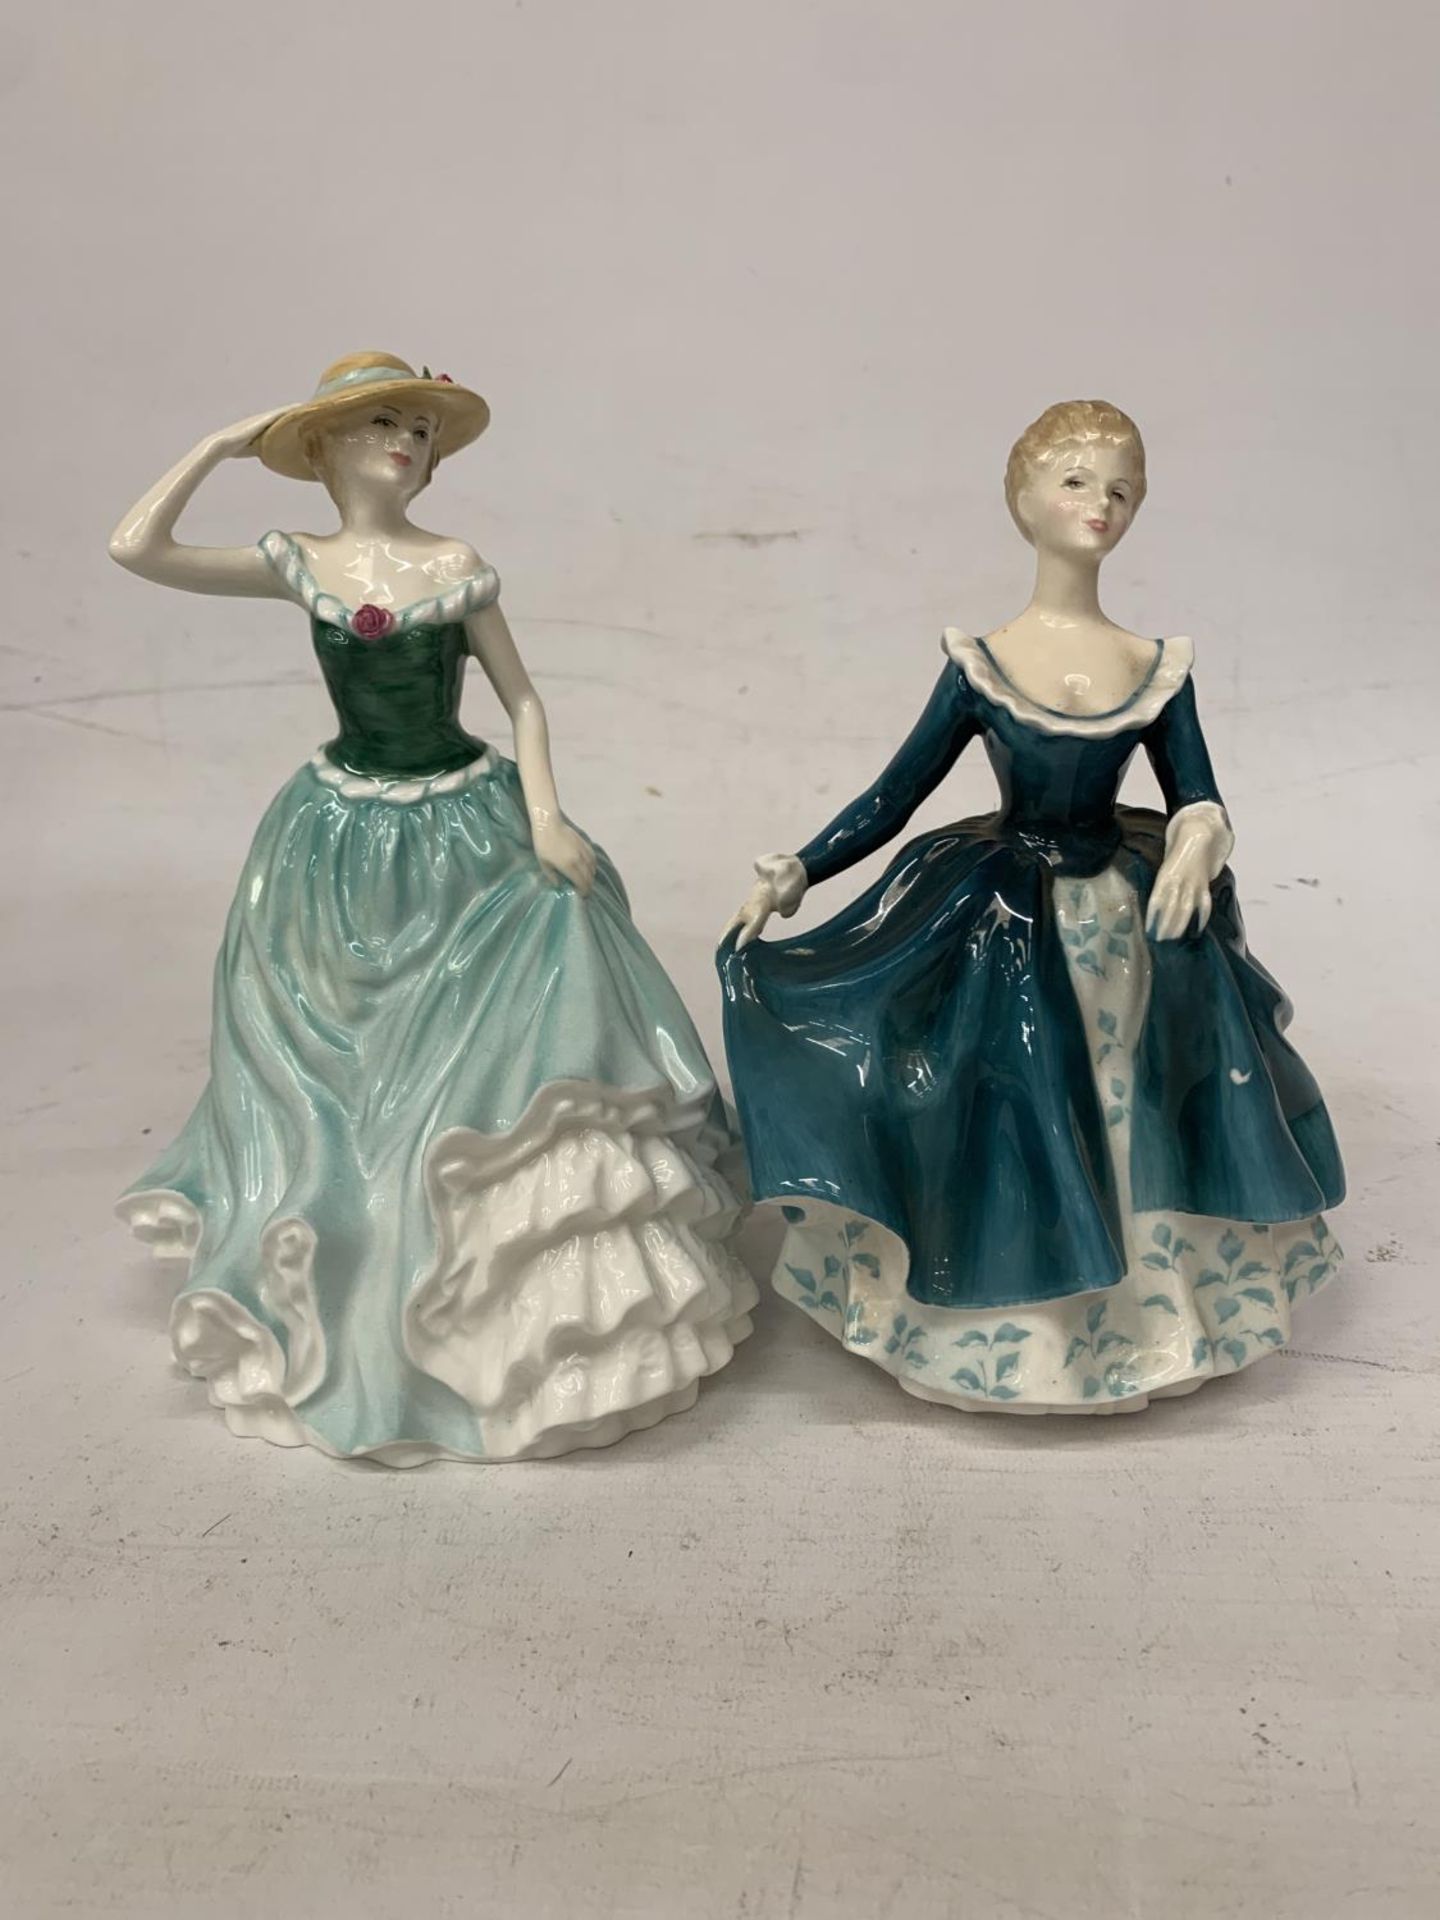 TWO ROYAL DOULTON FIGURES "JANINE" HN 2461 AND "EMILY" HN 4093